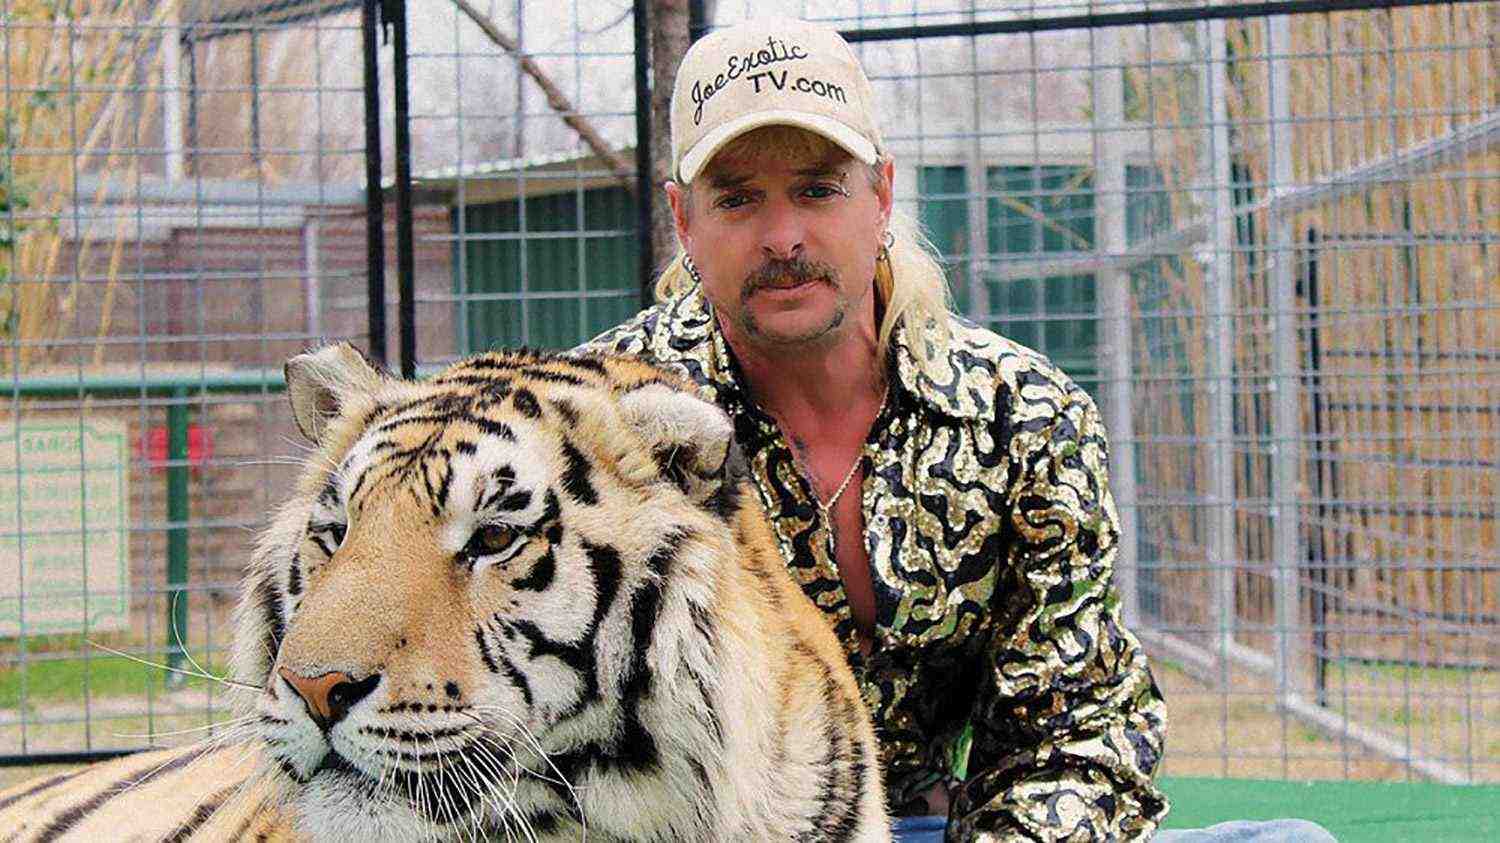 Pondering Joe Exotic's next wild circus act? Does his potential early release coincide with another audacious joe exotic presidential election bid? Dive into this rousing mix of true crime, reality TV, and political spectacle!